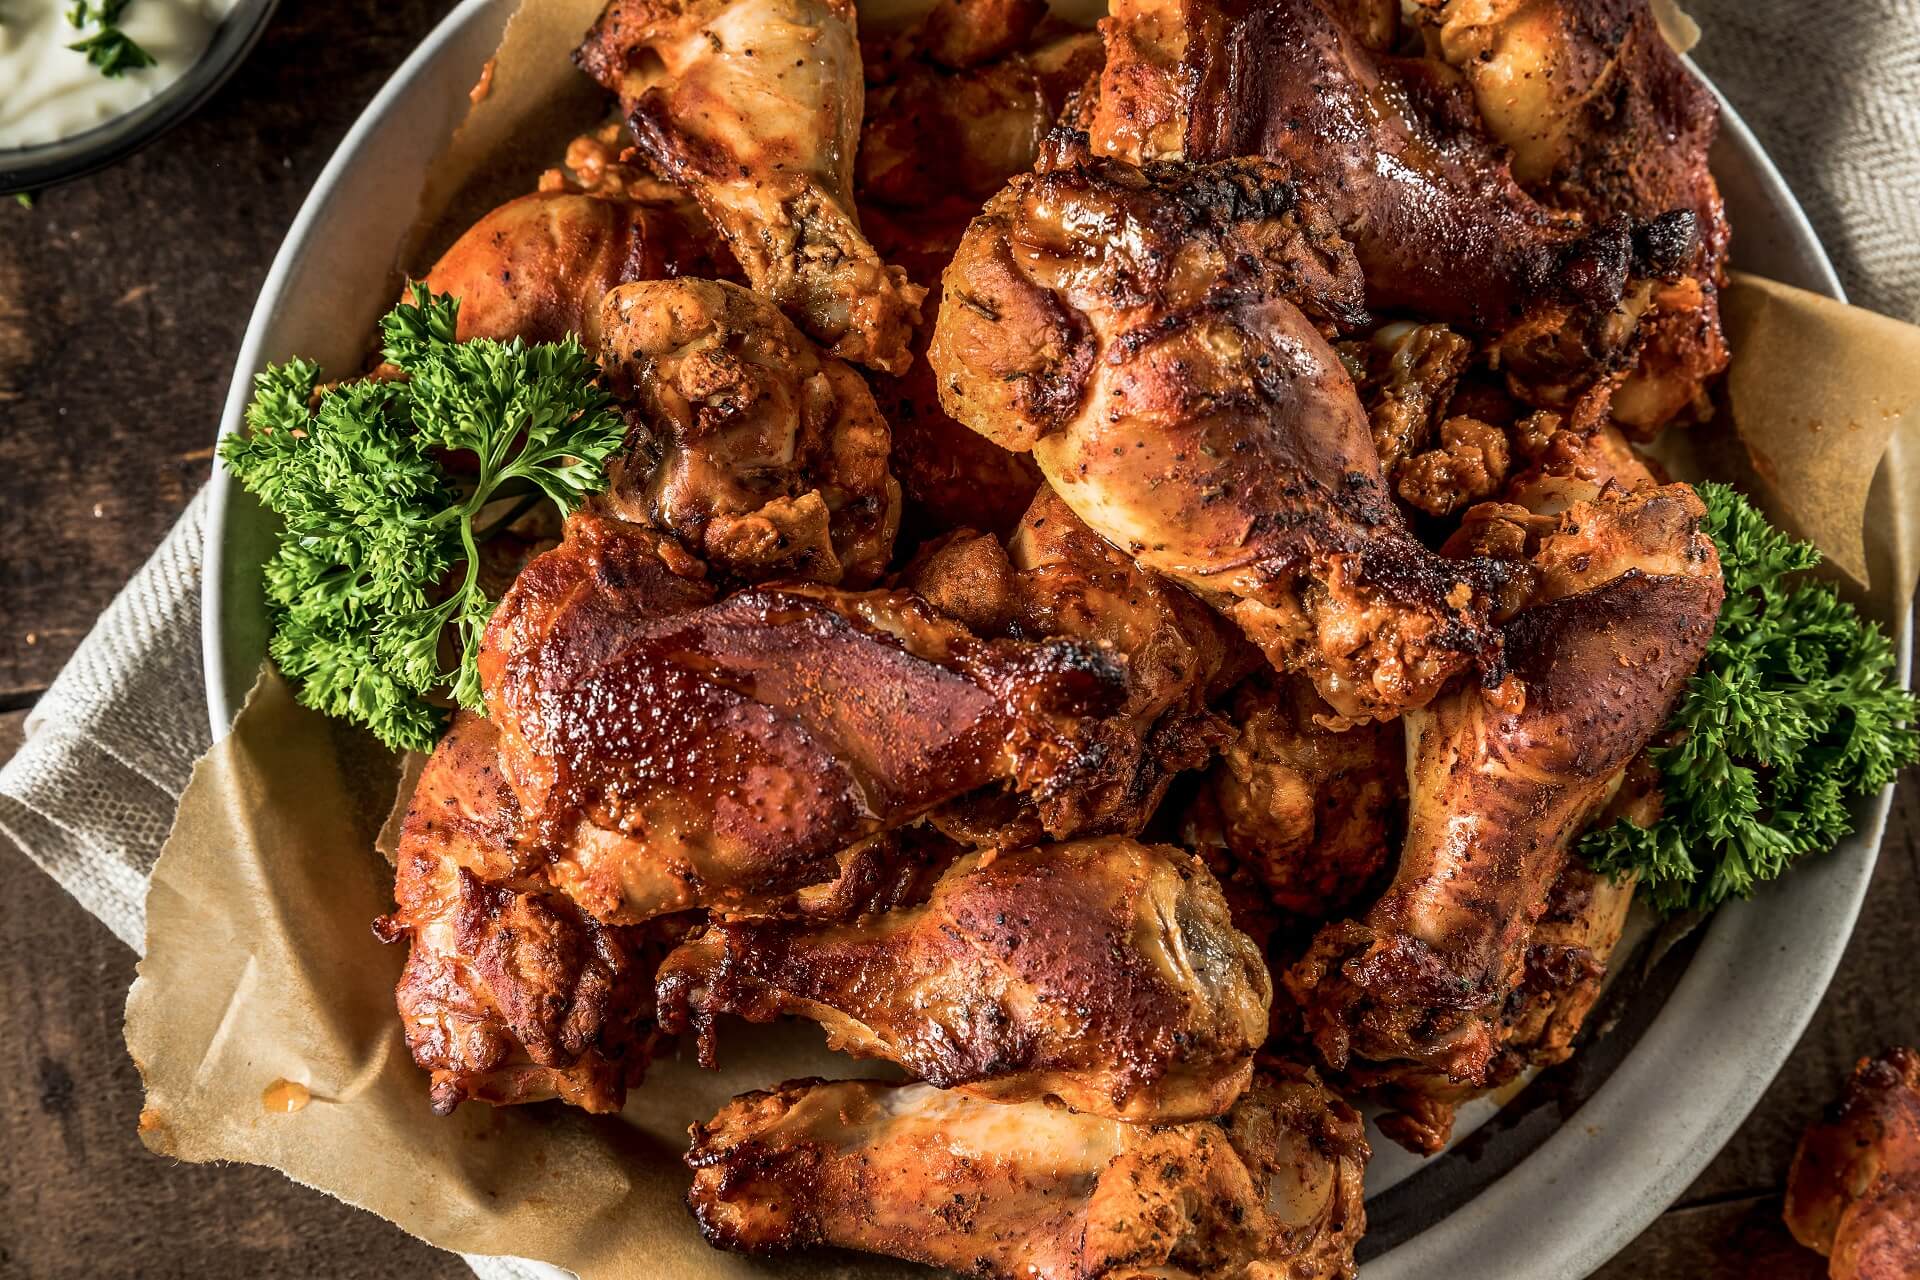 Chicken wings are in short supply in some restaurants 